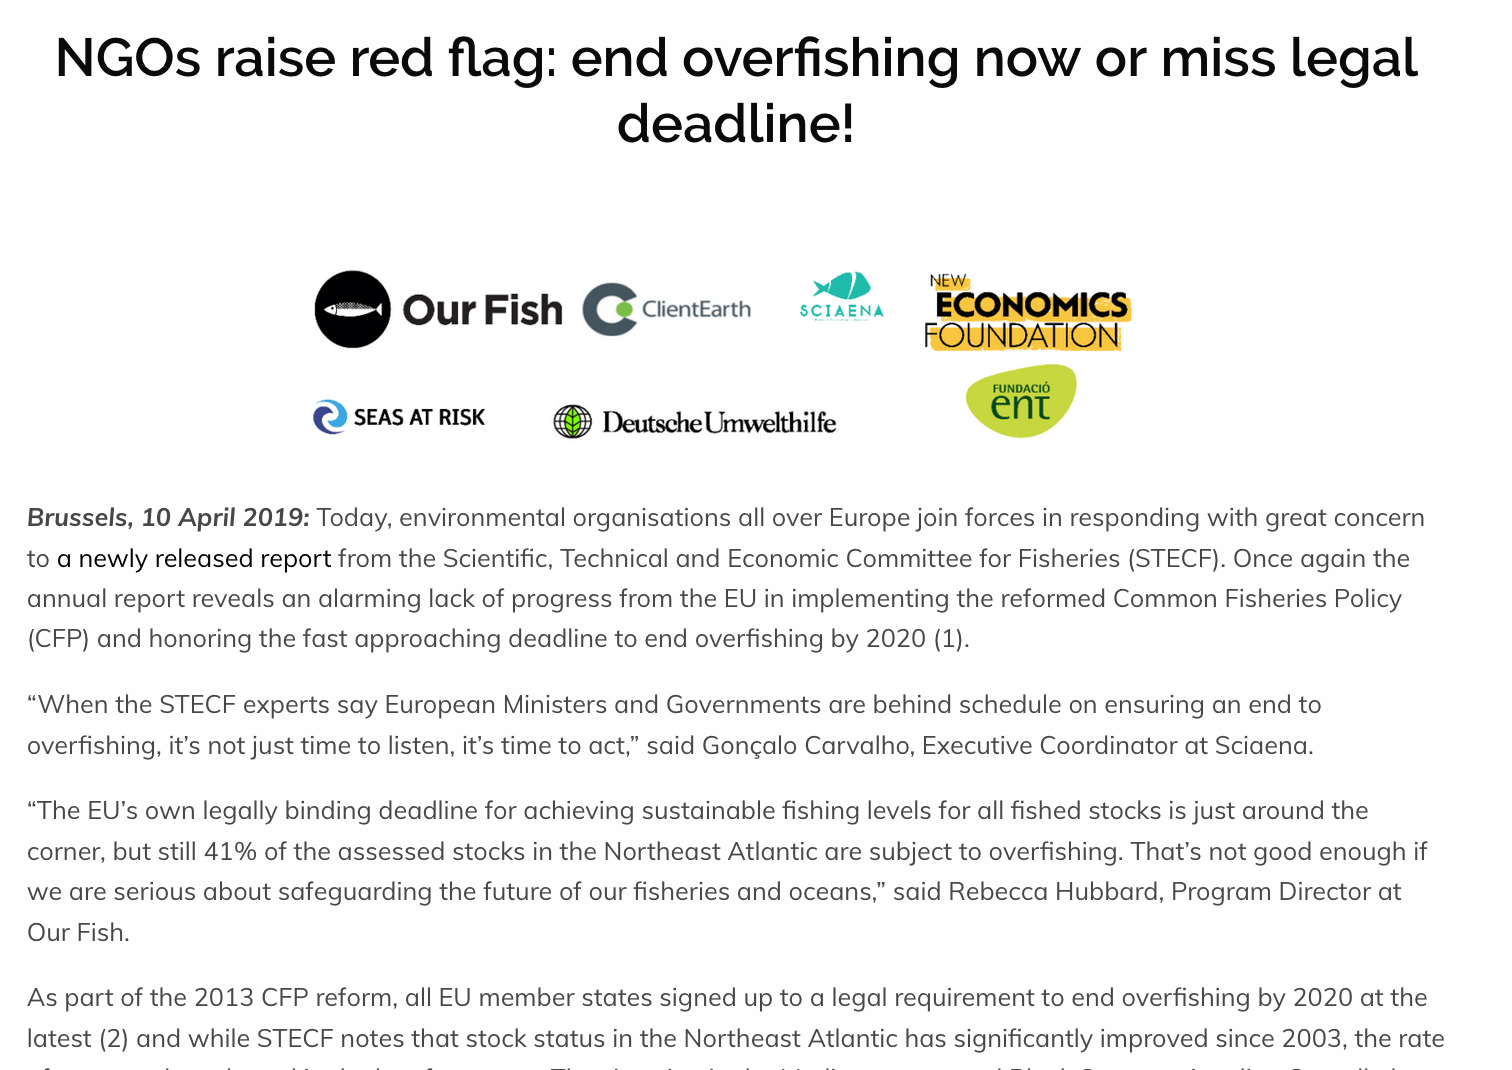 NGOs raise red flag: end overfishing now or miss legal deadline!